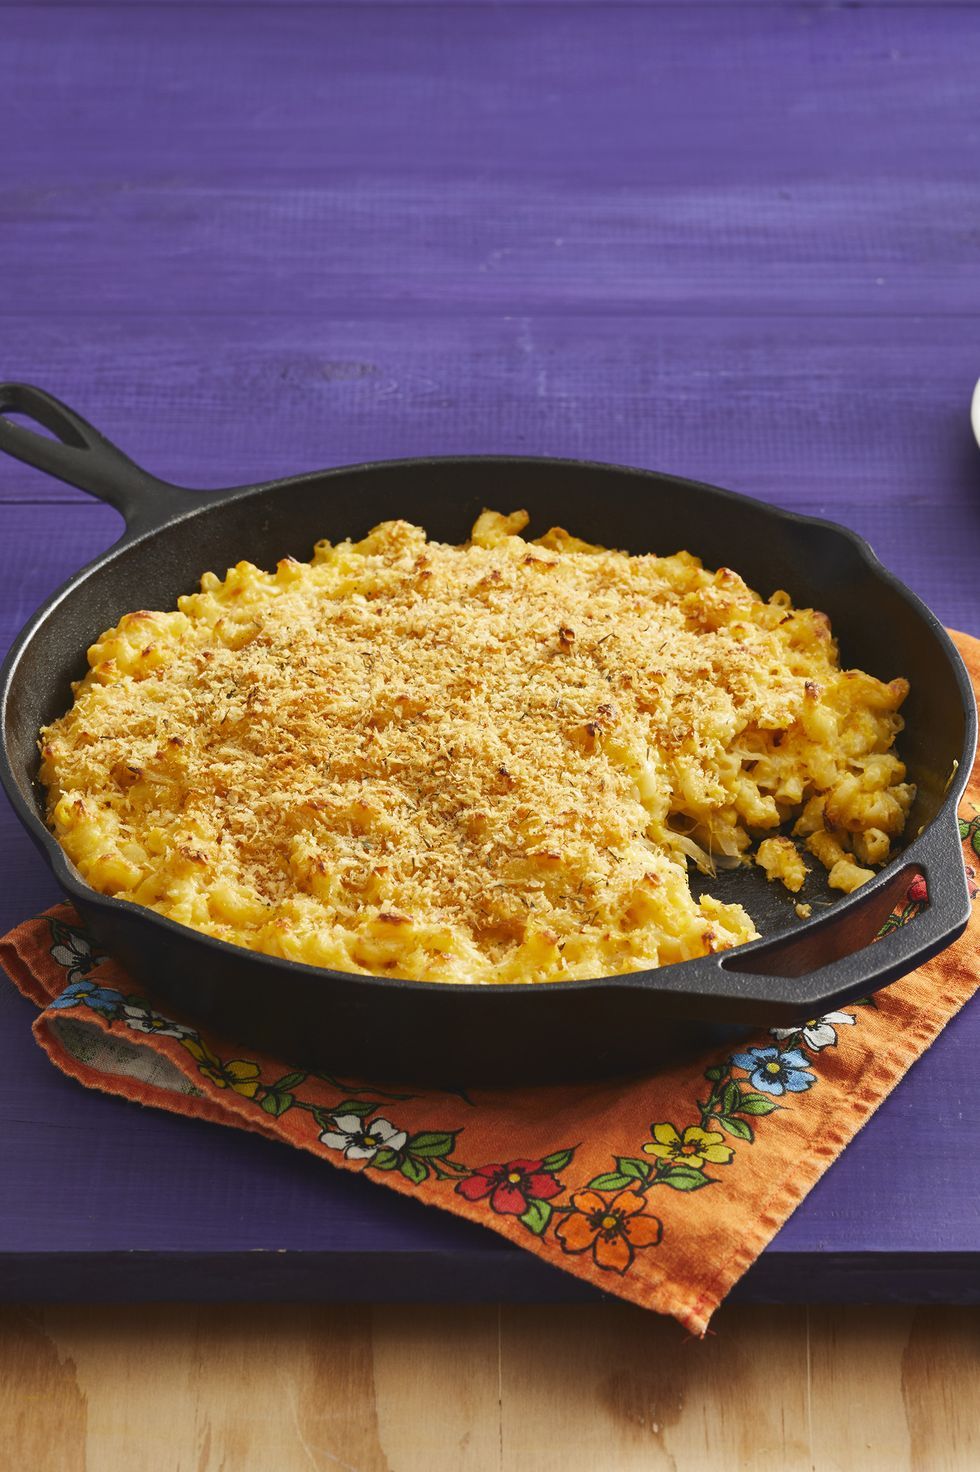 https://hips.hearstapps.com/hmg-prod/images/cast-iron-skillet-recipes-butternut-squash-mac-and-cheese-1629744846.jpeg